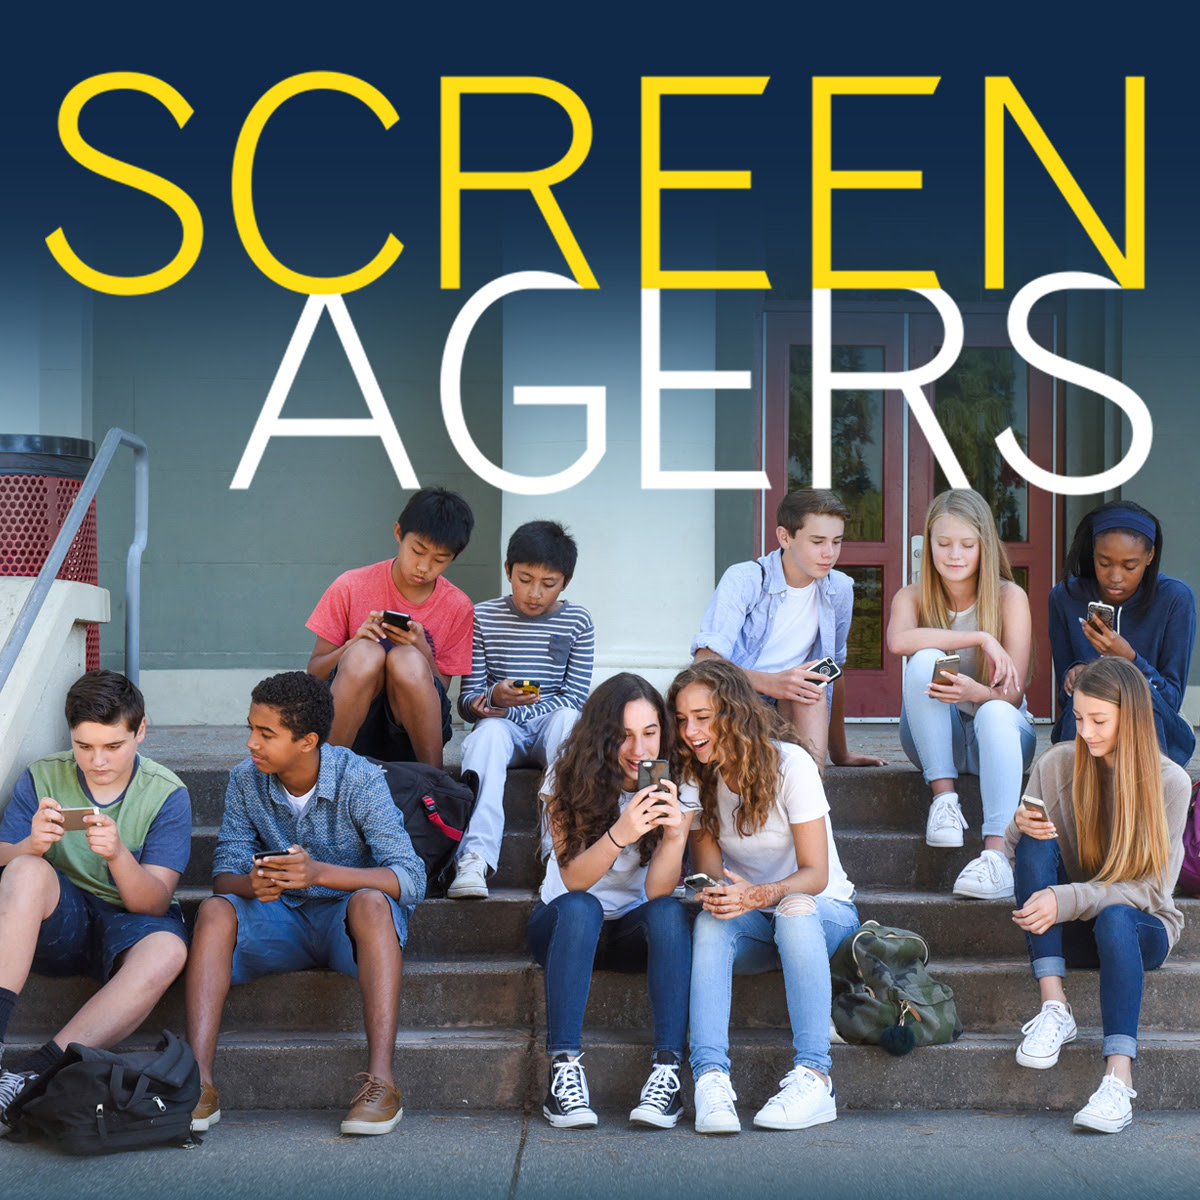 Screenagers Film Presented By Urban Middle School